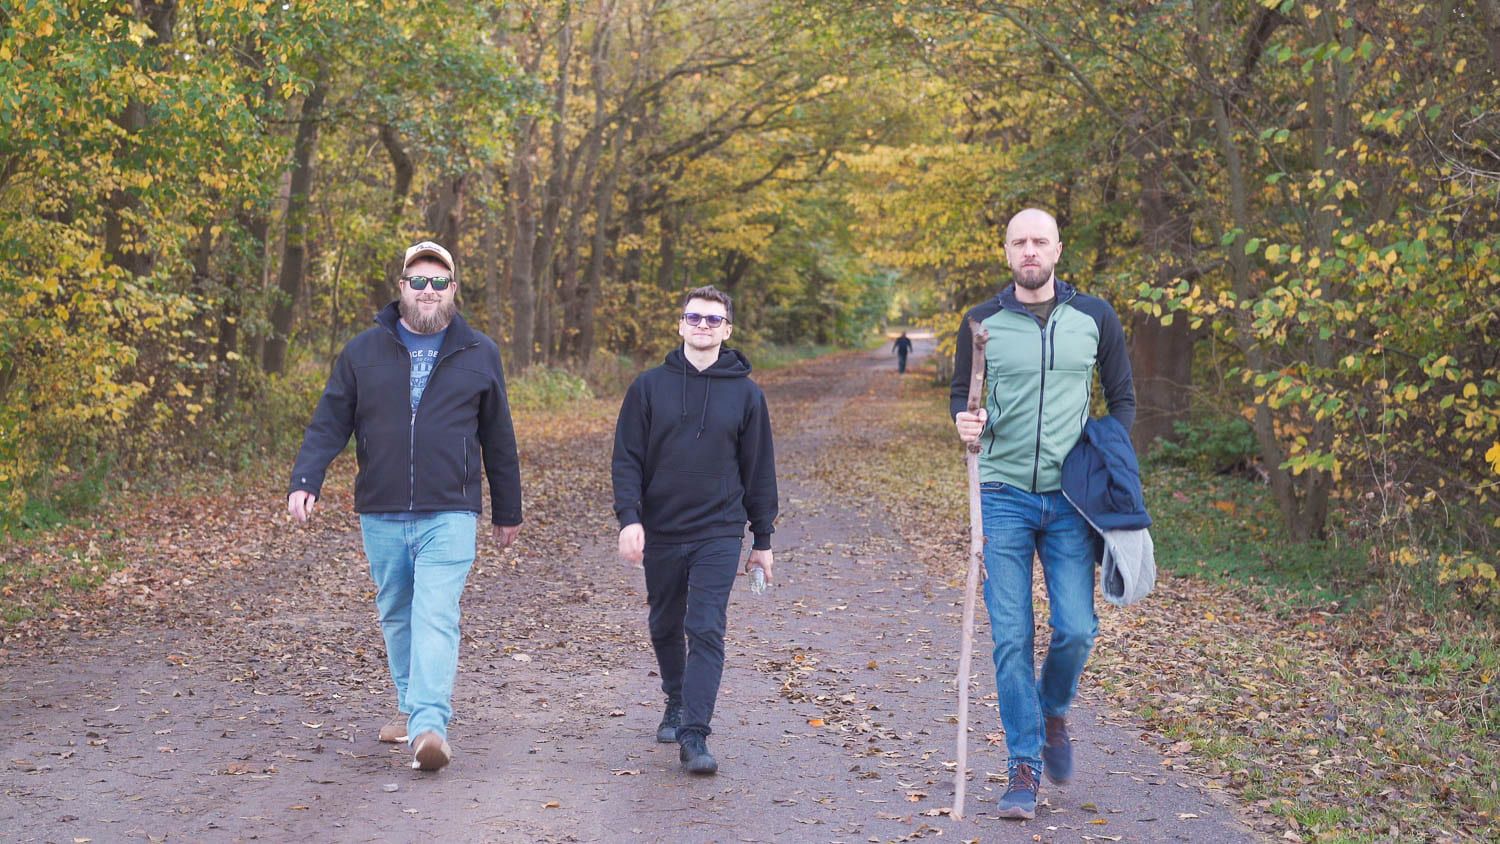 Three men walking on a leaf-covered path with autumn trees